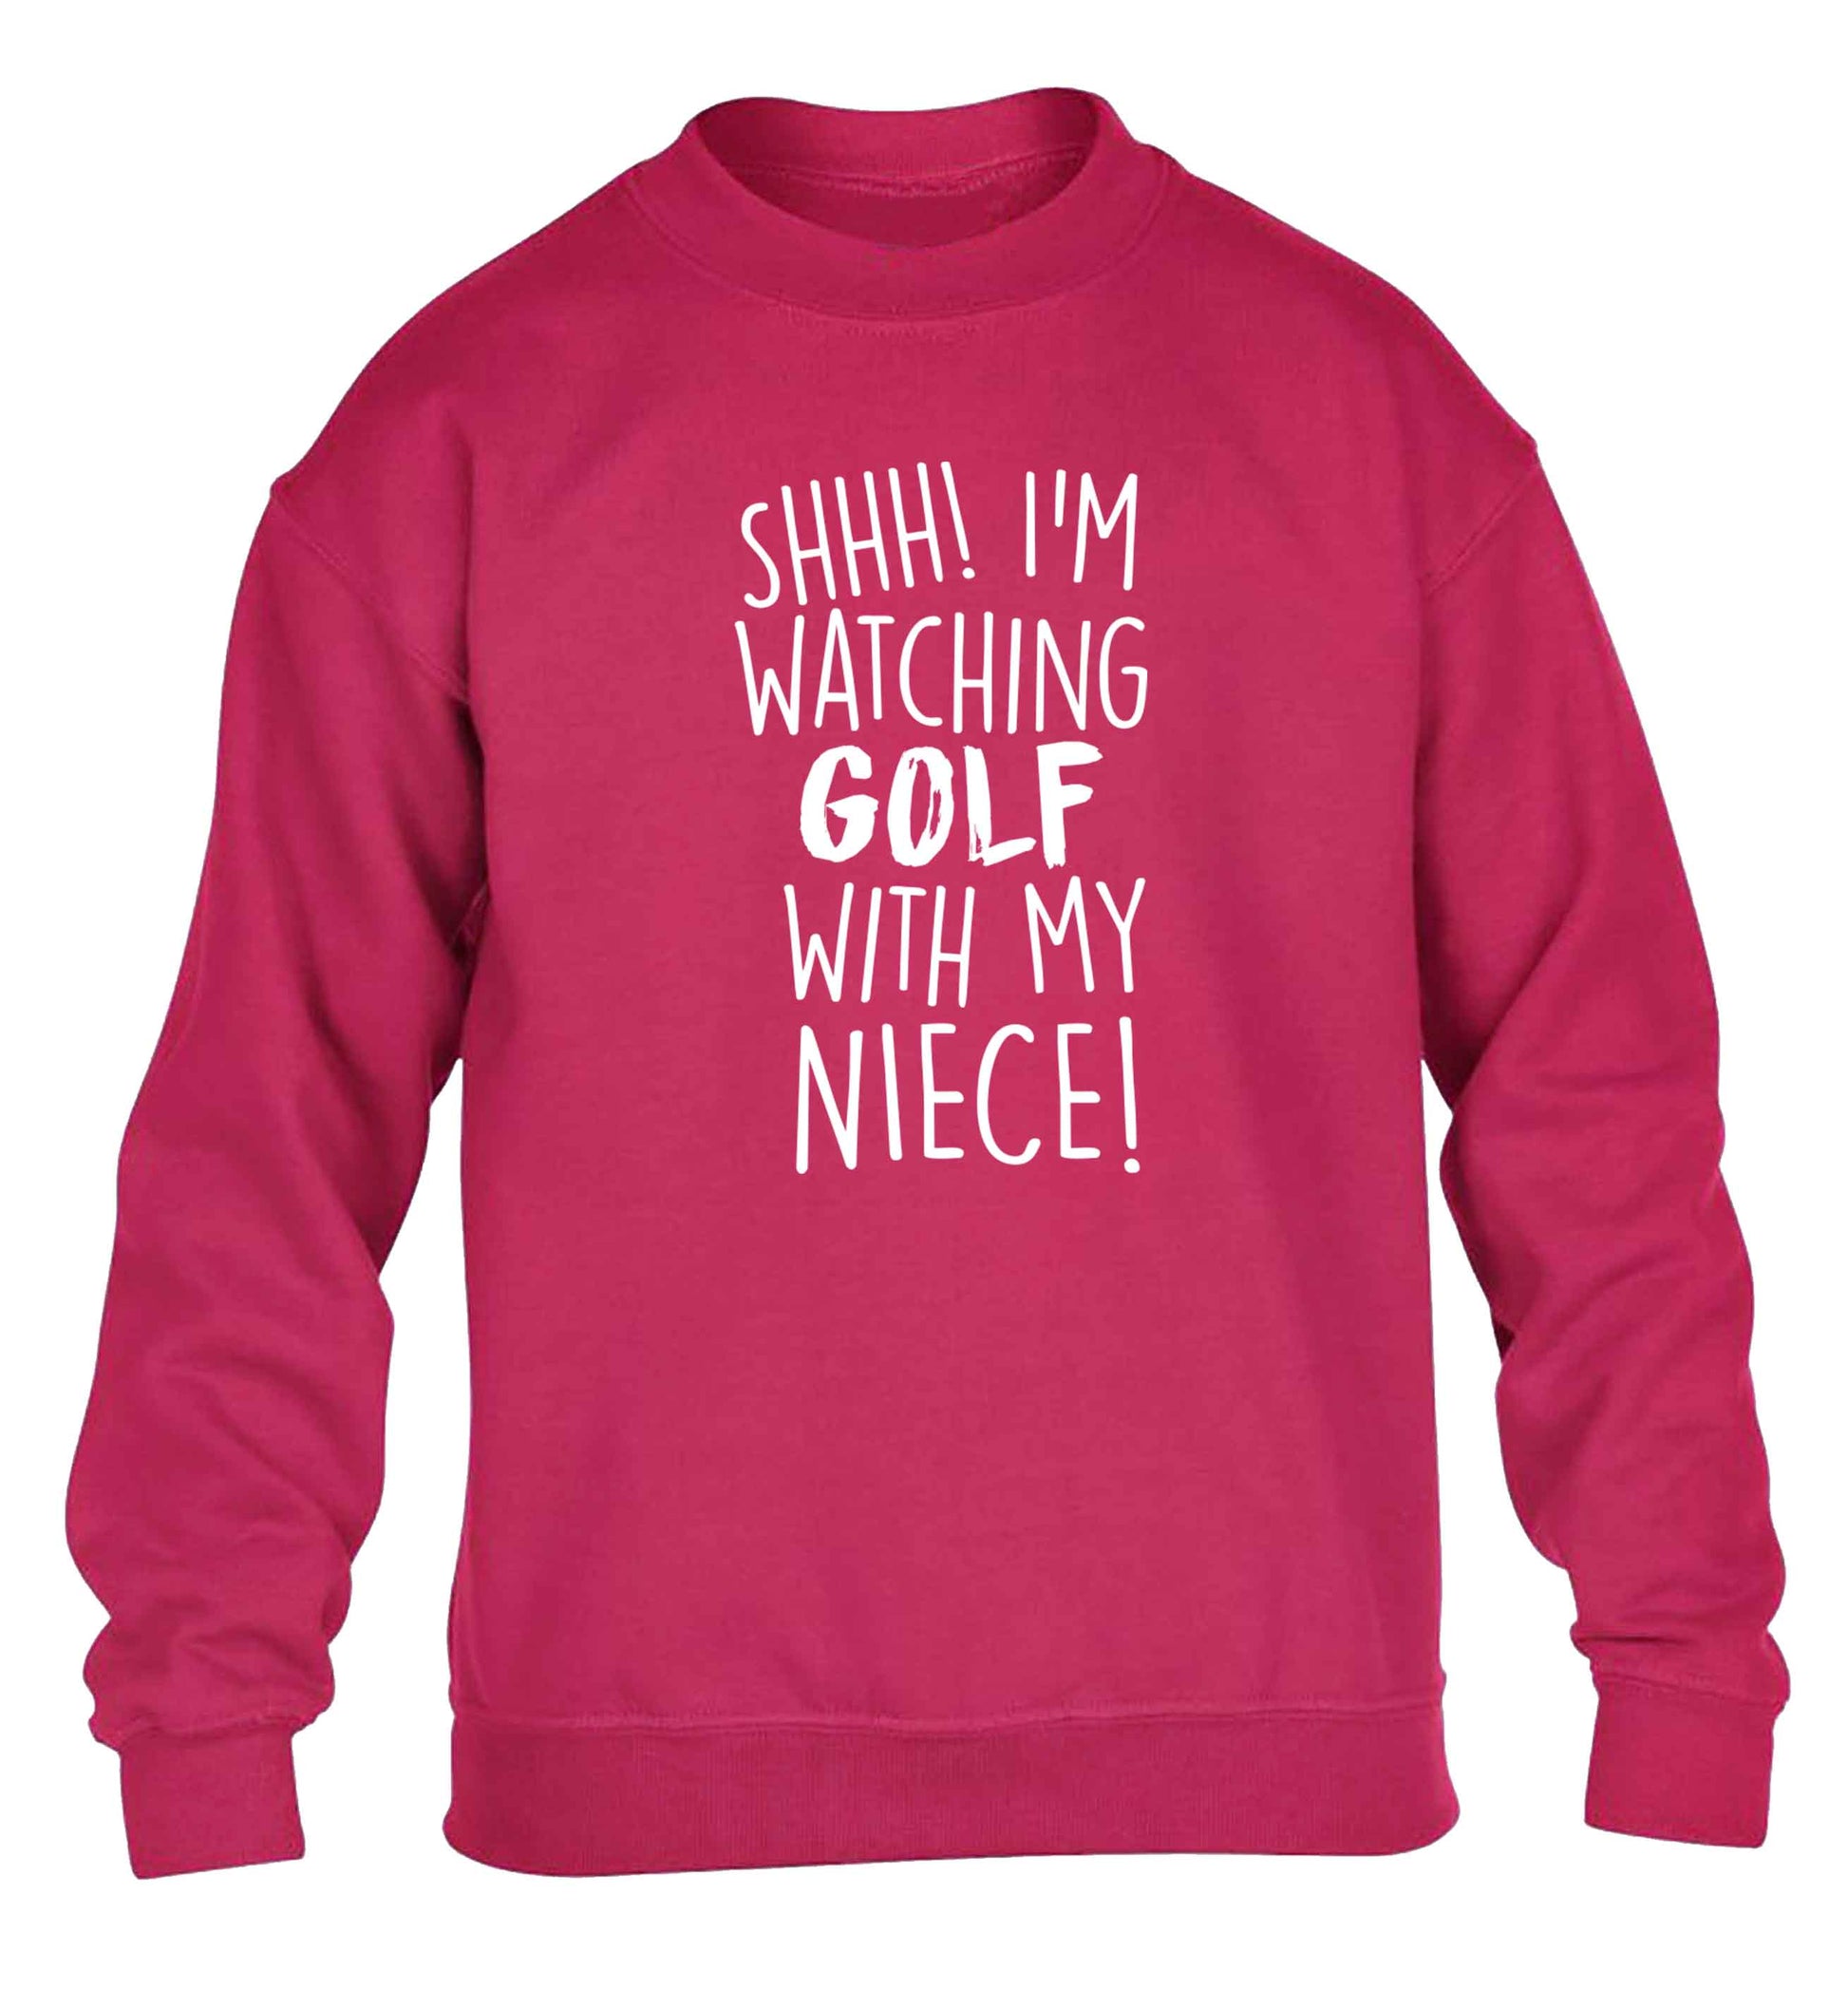 Shh I'm watching golf with my niece children's pink sweater 12-13 Years